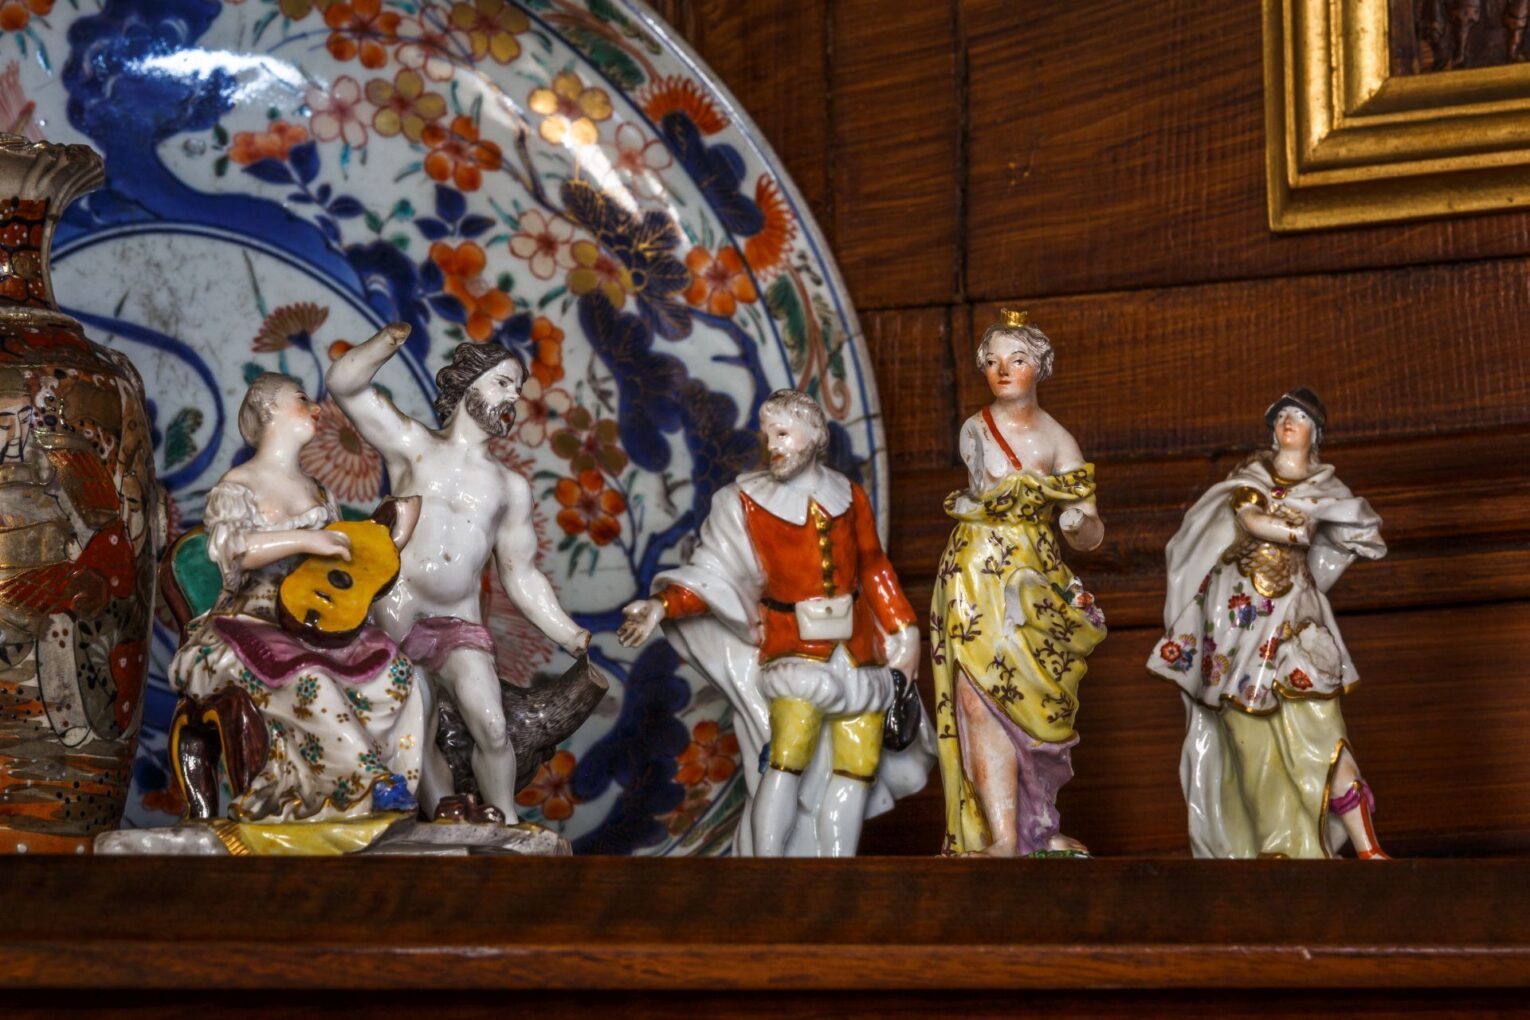 Porcelain figures in the Chinese Room